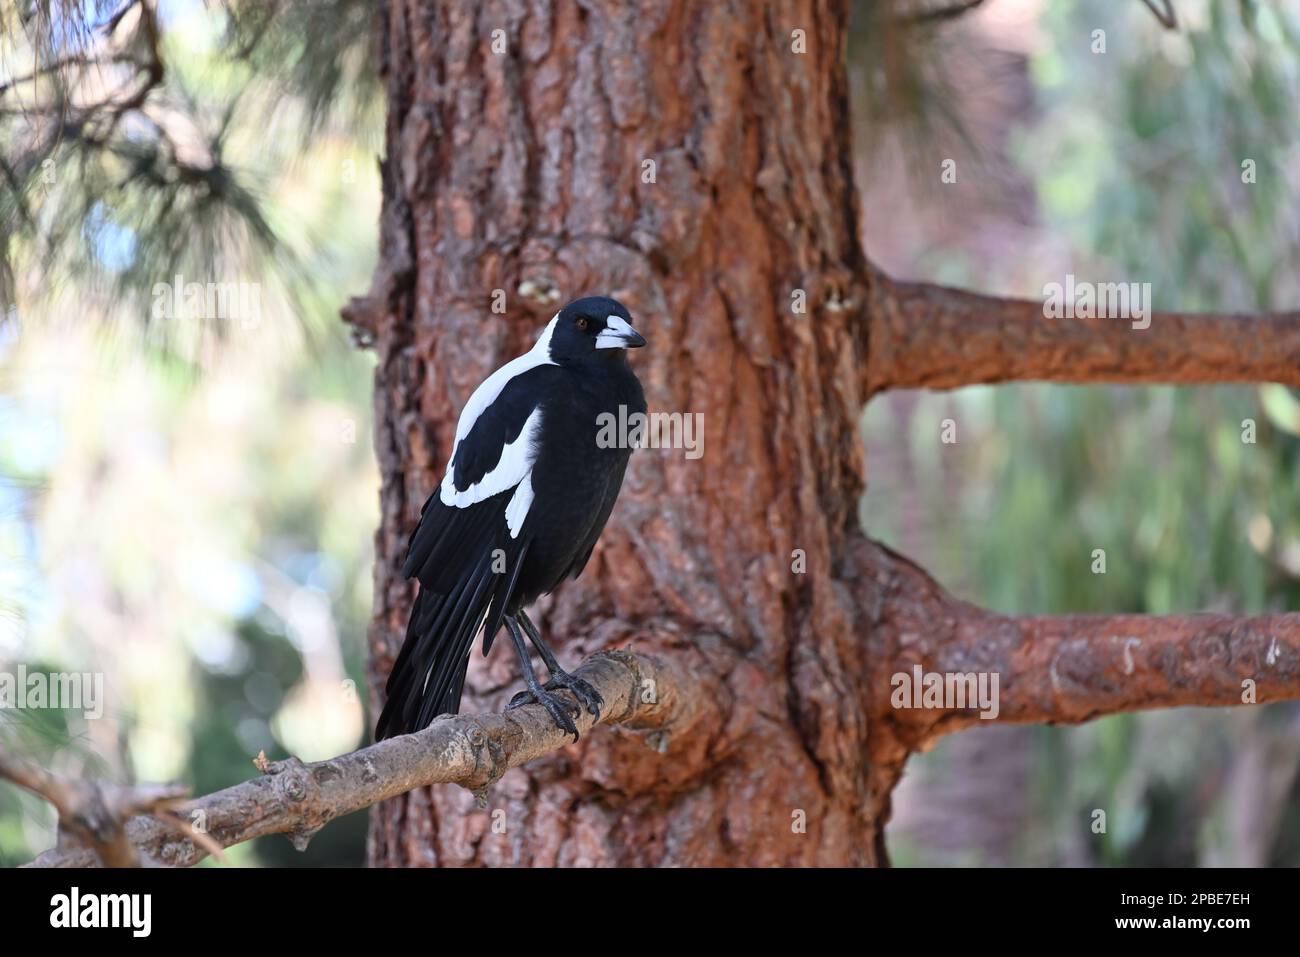 Male Australian magpie perched on a tree branch as it looks into the foreground, its head slightly turned Stock Photo